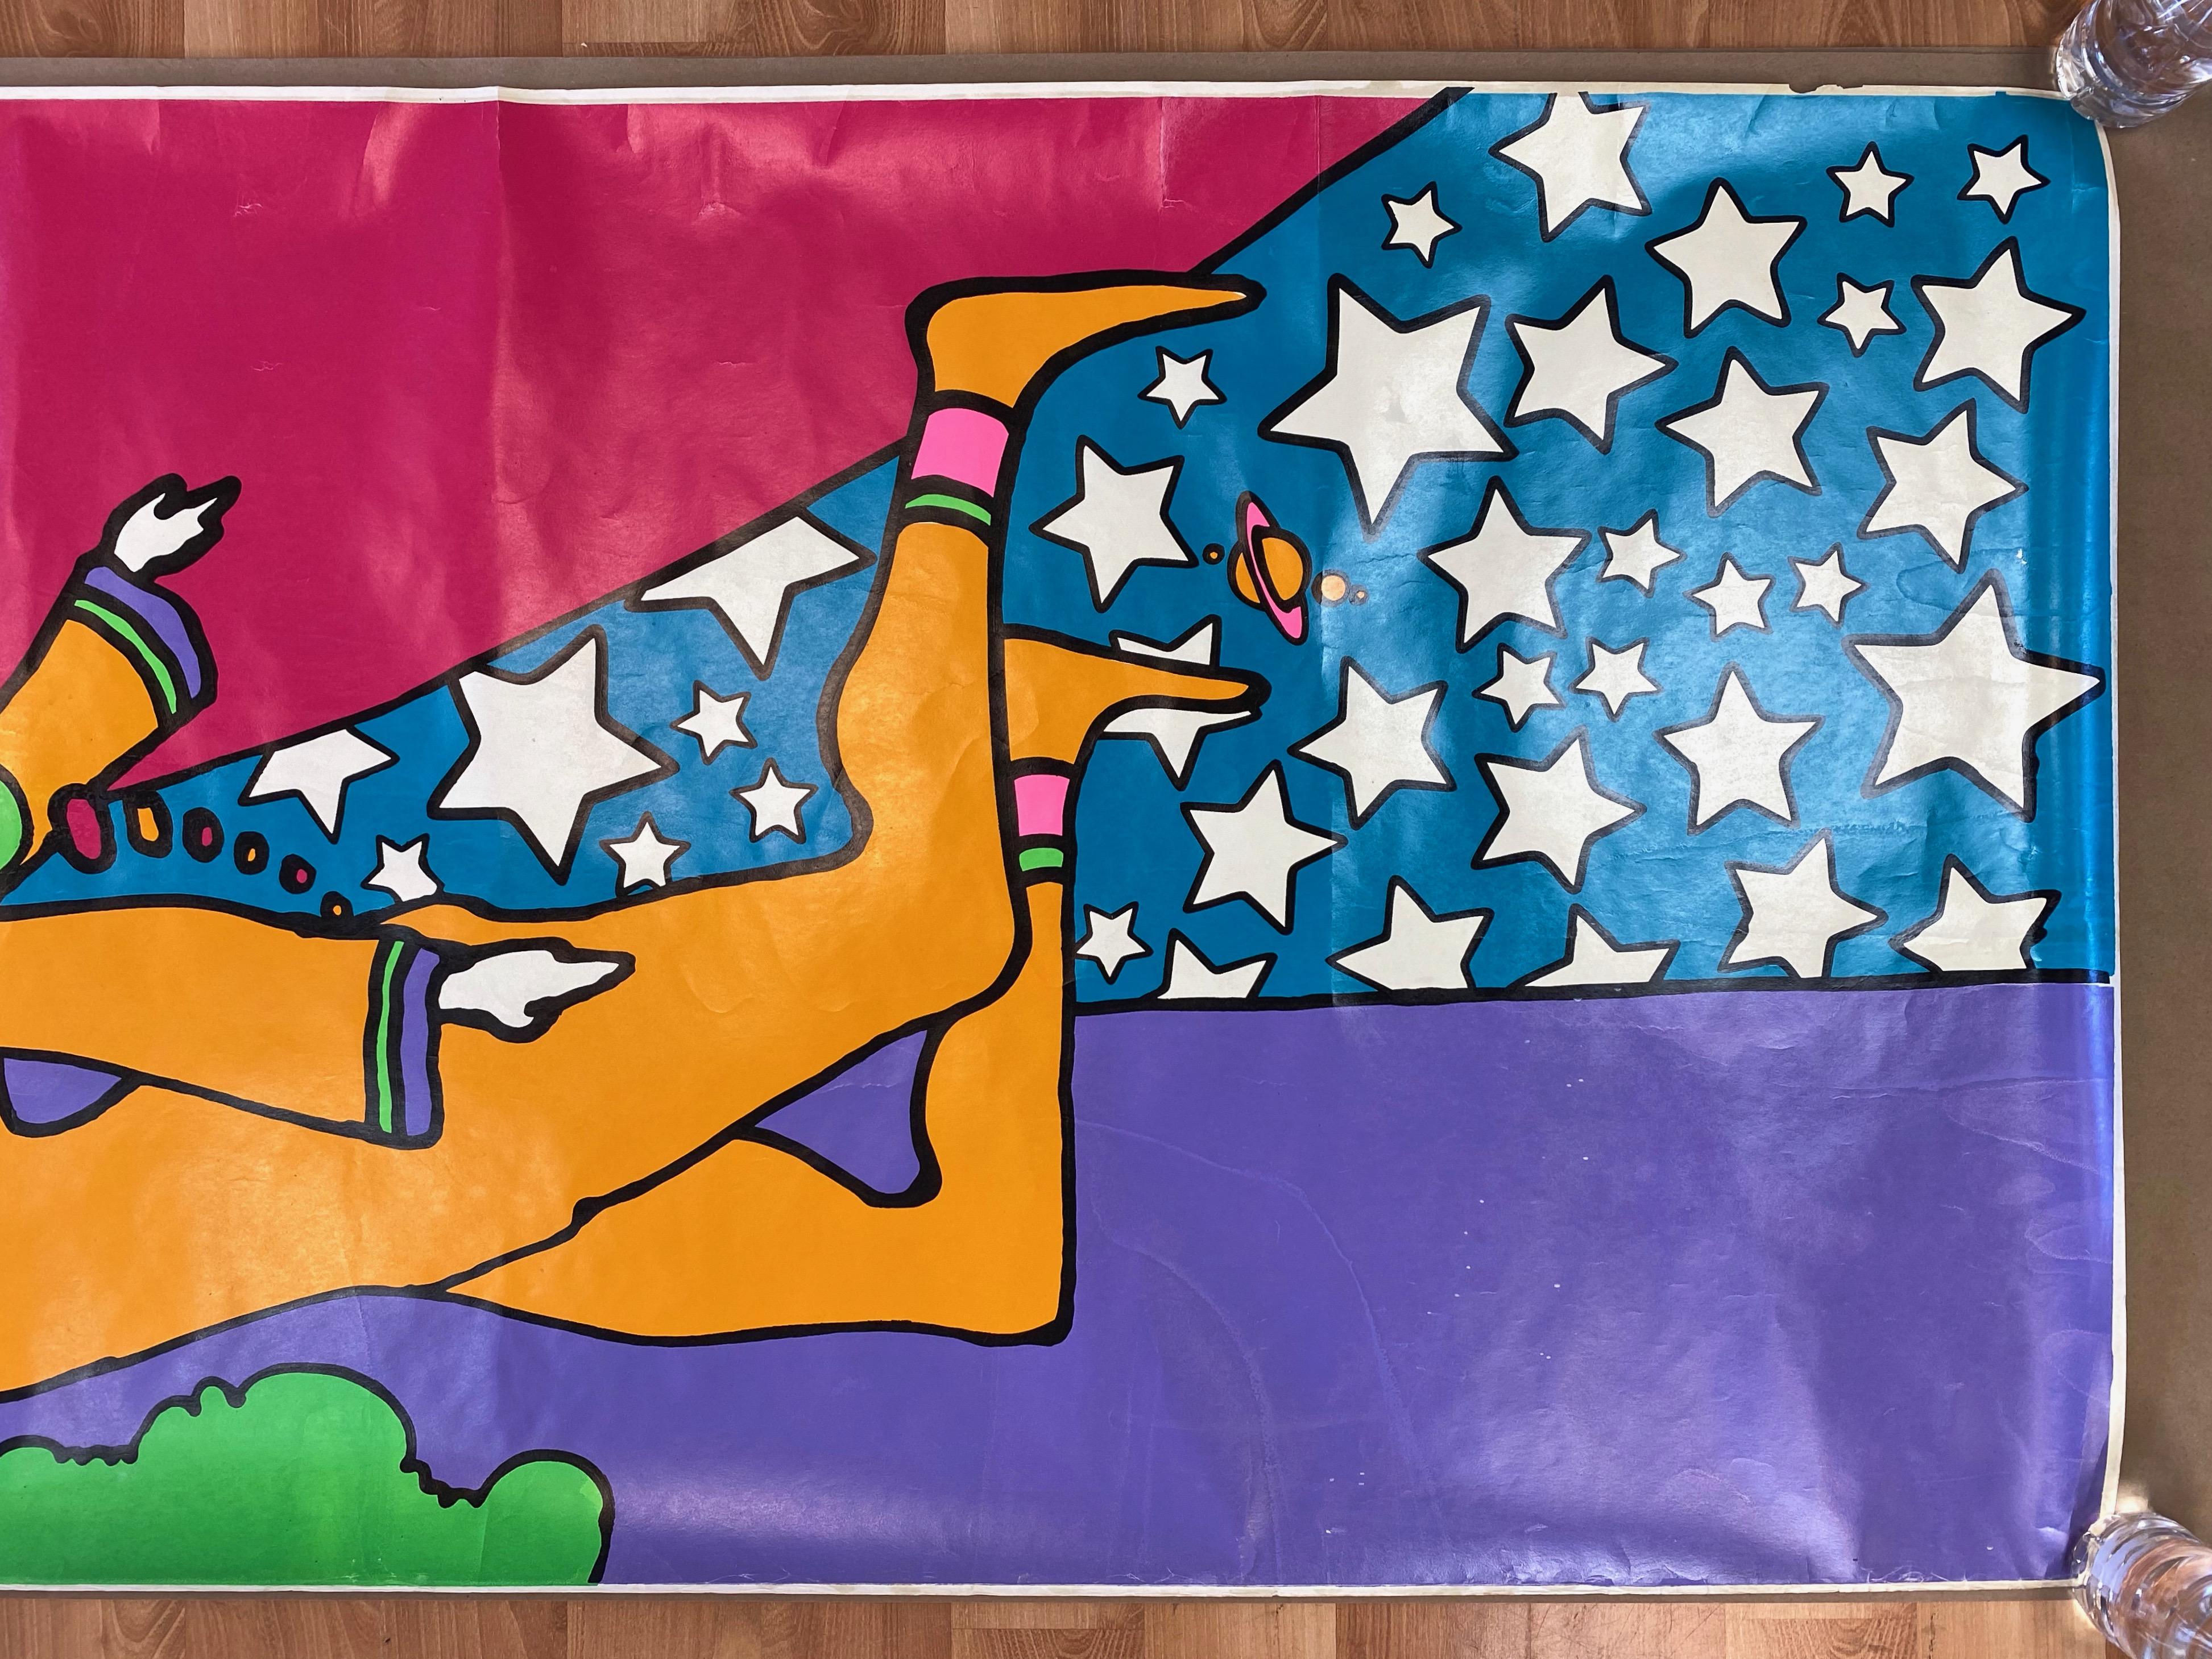 Peter Max 12-Foot-Wide Serigraph for 1970 de Young Museum Solo Exhibition ‘B’ For Sale 8